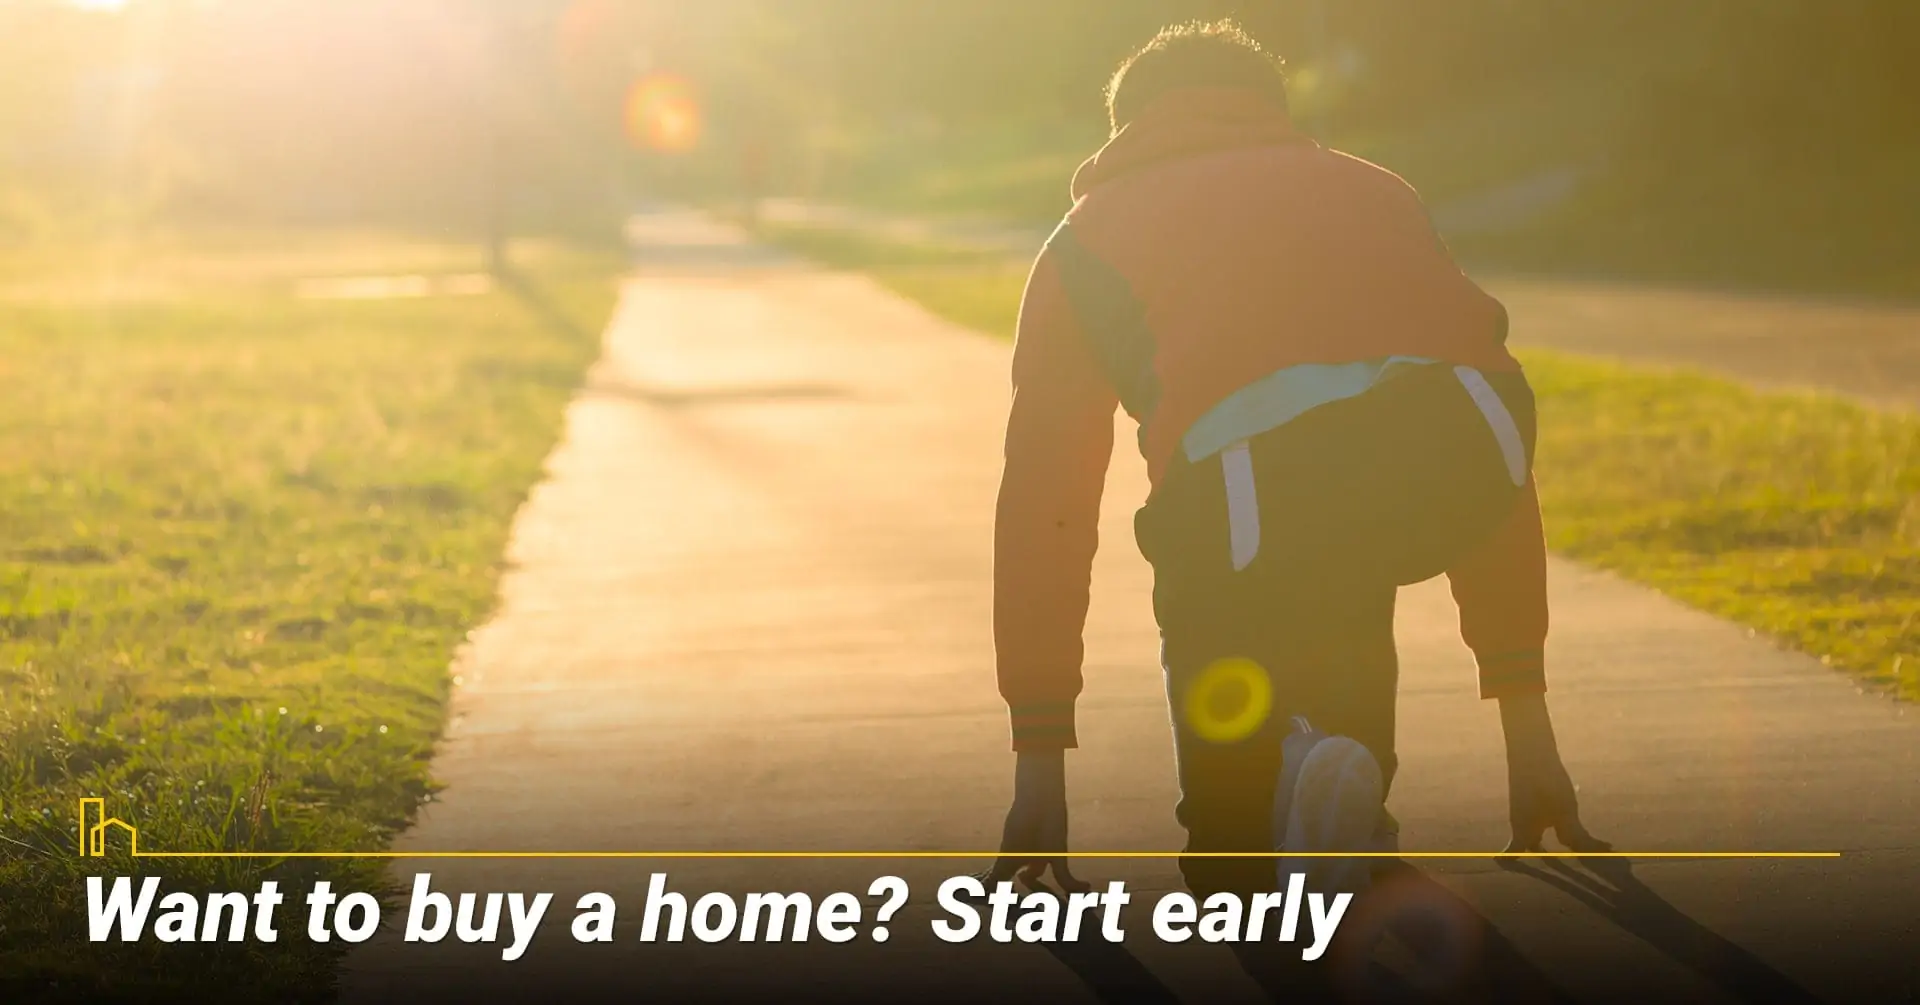 Want to buy a home? Start early, get an early start in the home buying process